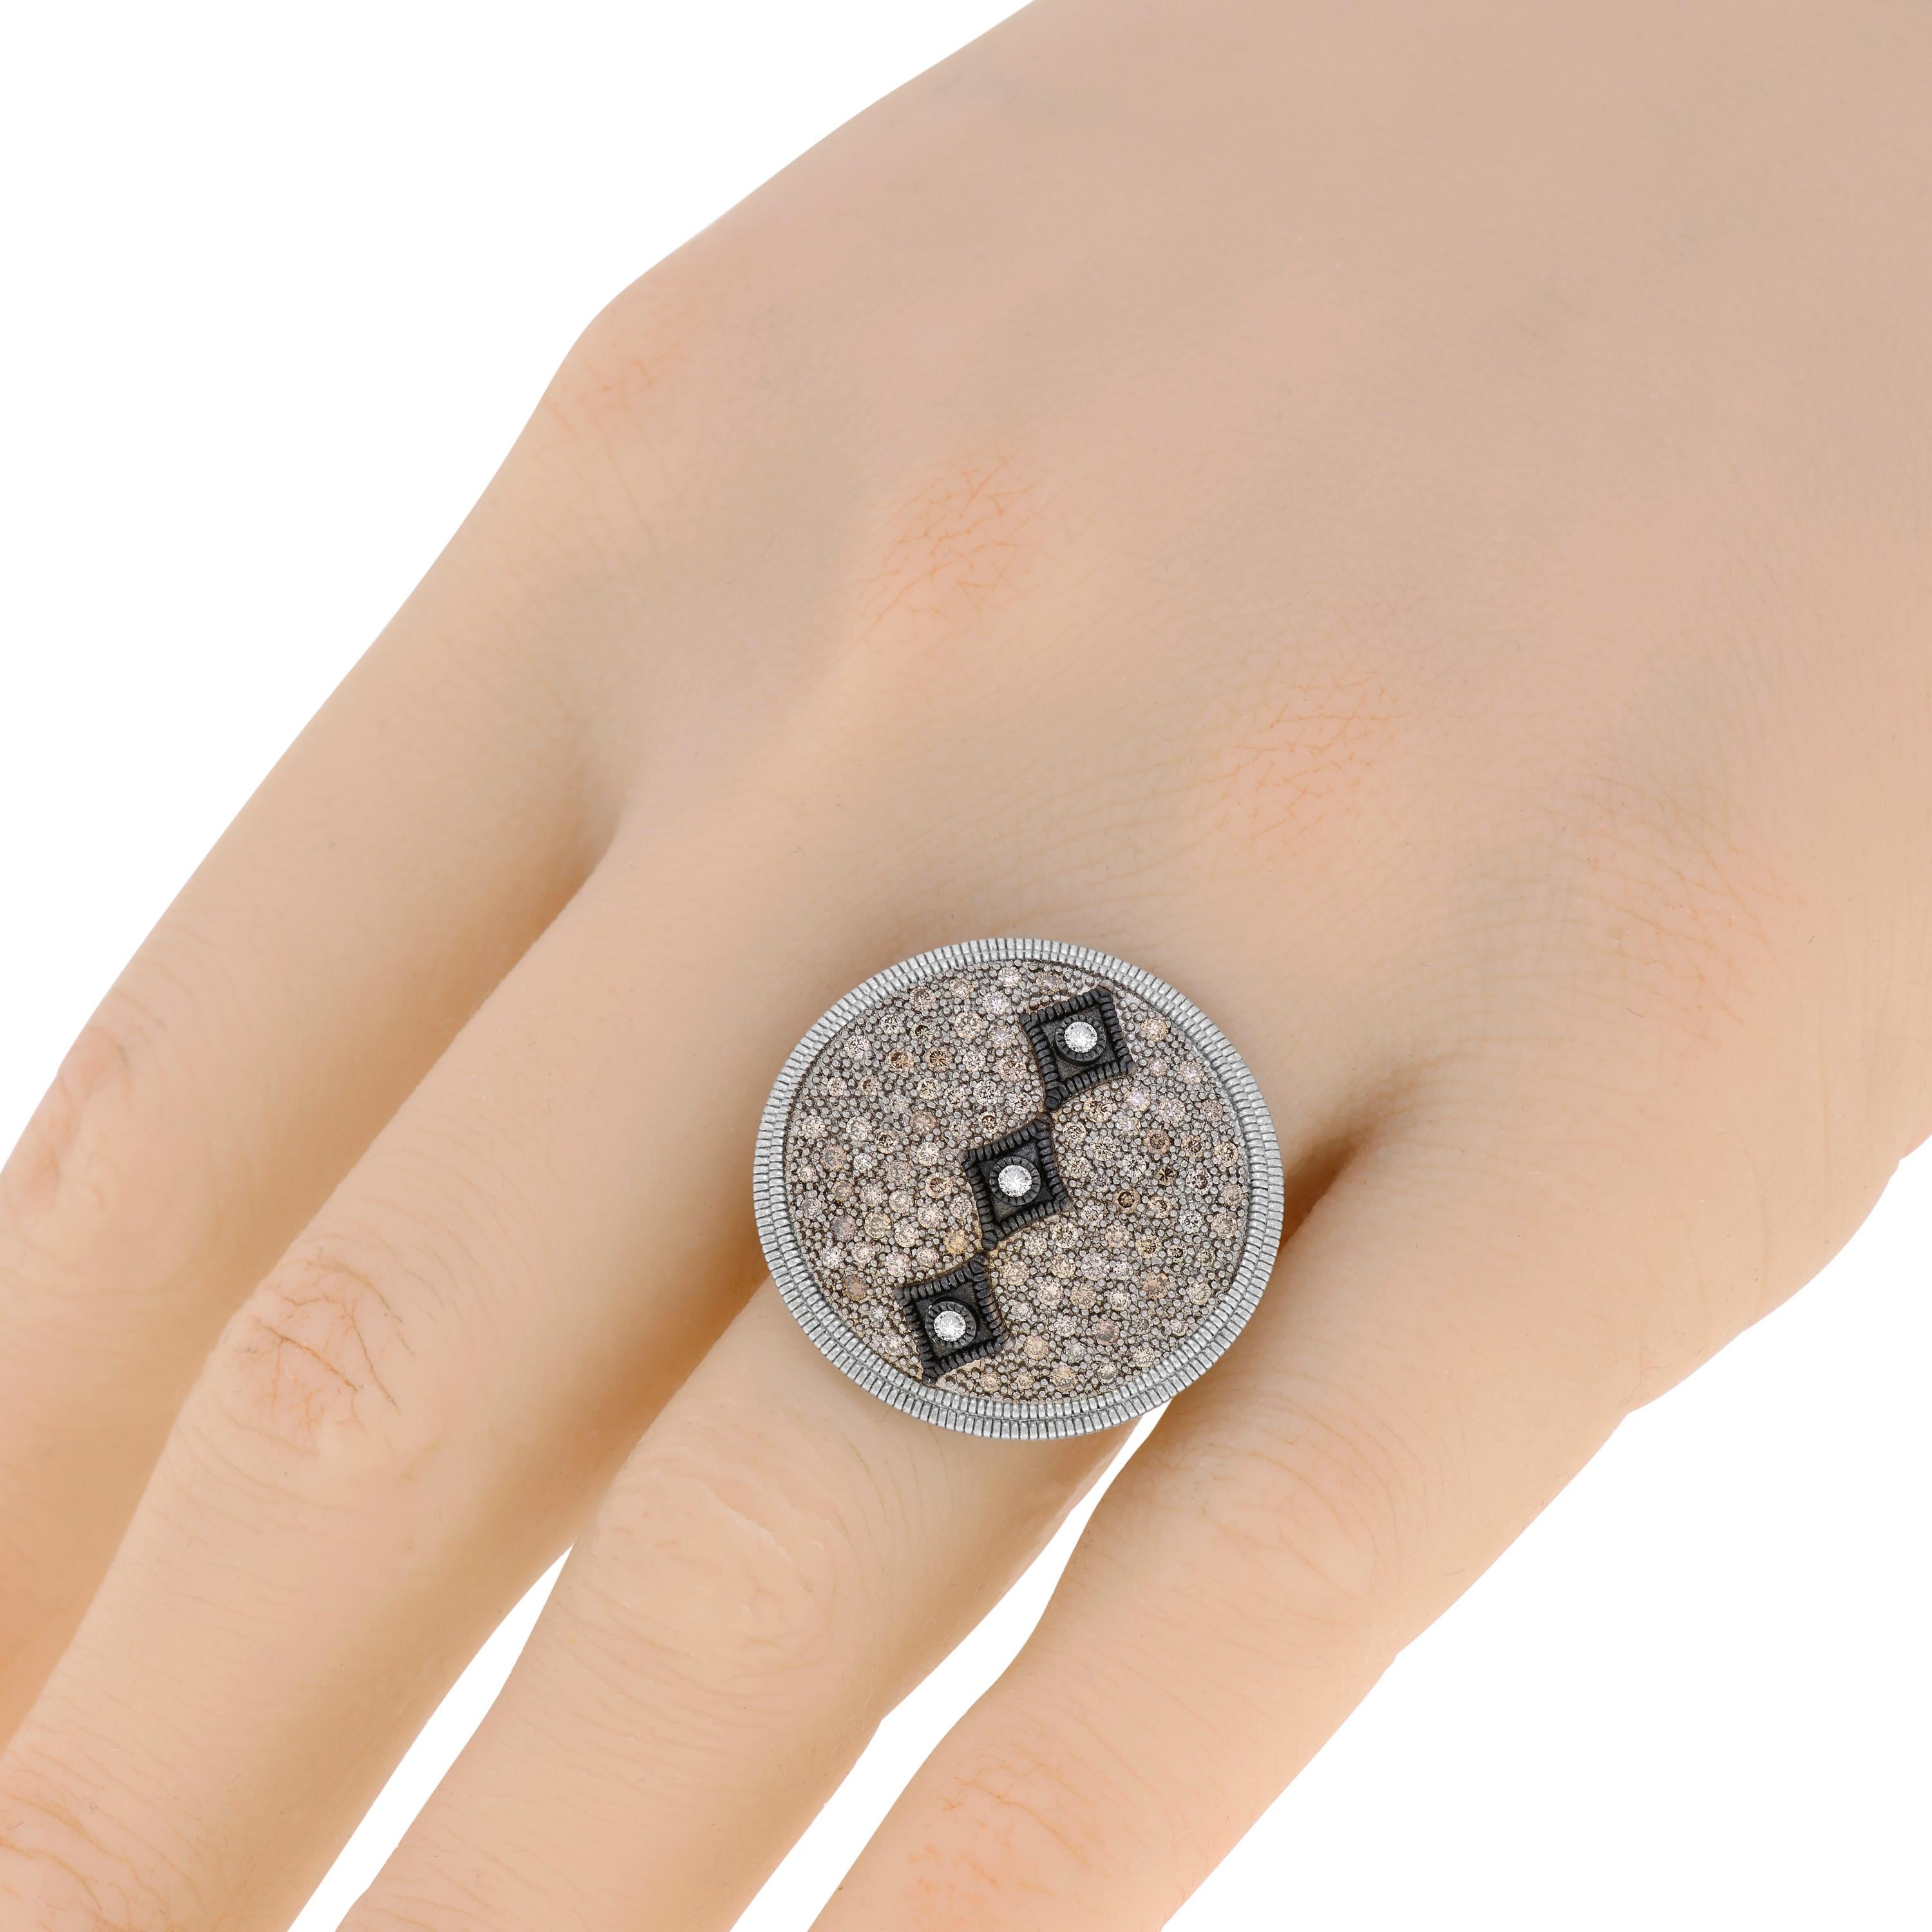 Armenta New World sterling silver statement ring features 0.65ct. tw. pave champagne diamonds set in sterling silver with blackened accents. The ring size is 6.5 (53.1). The decoration diameter is 1